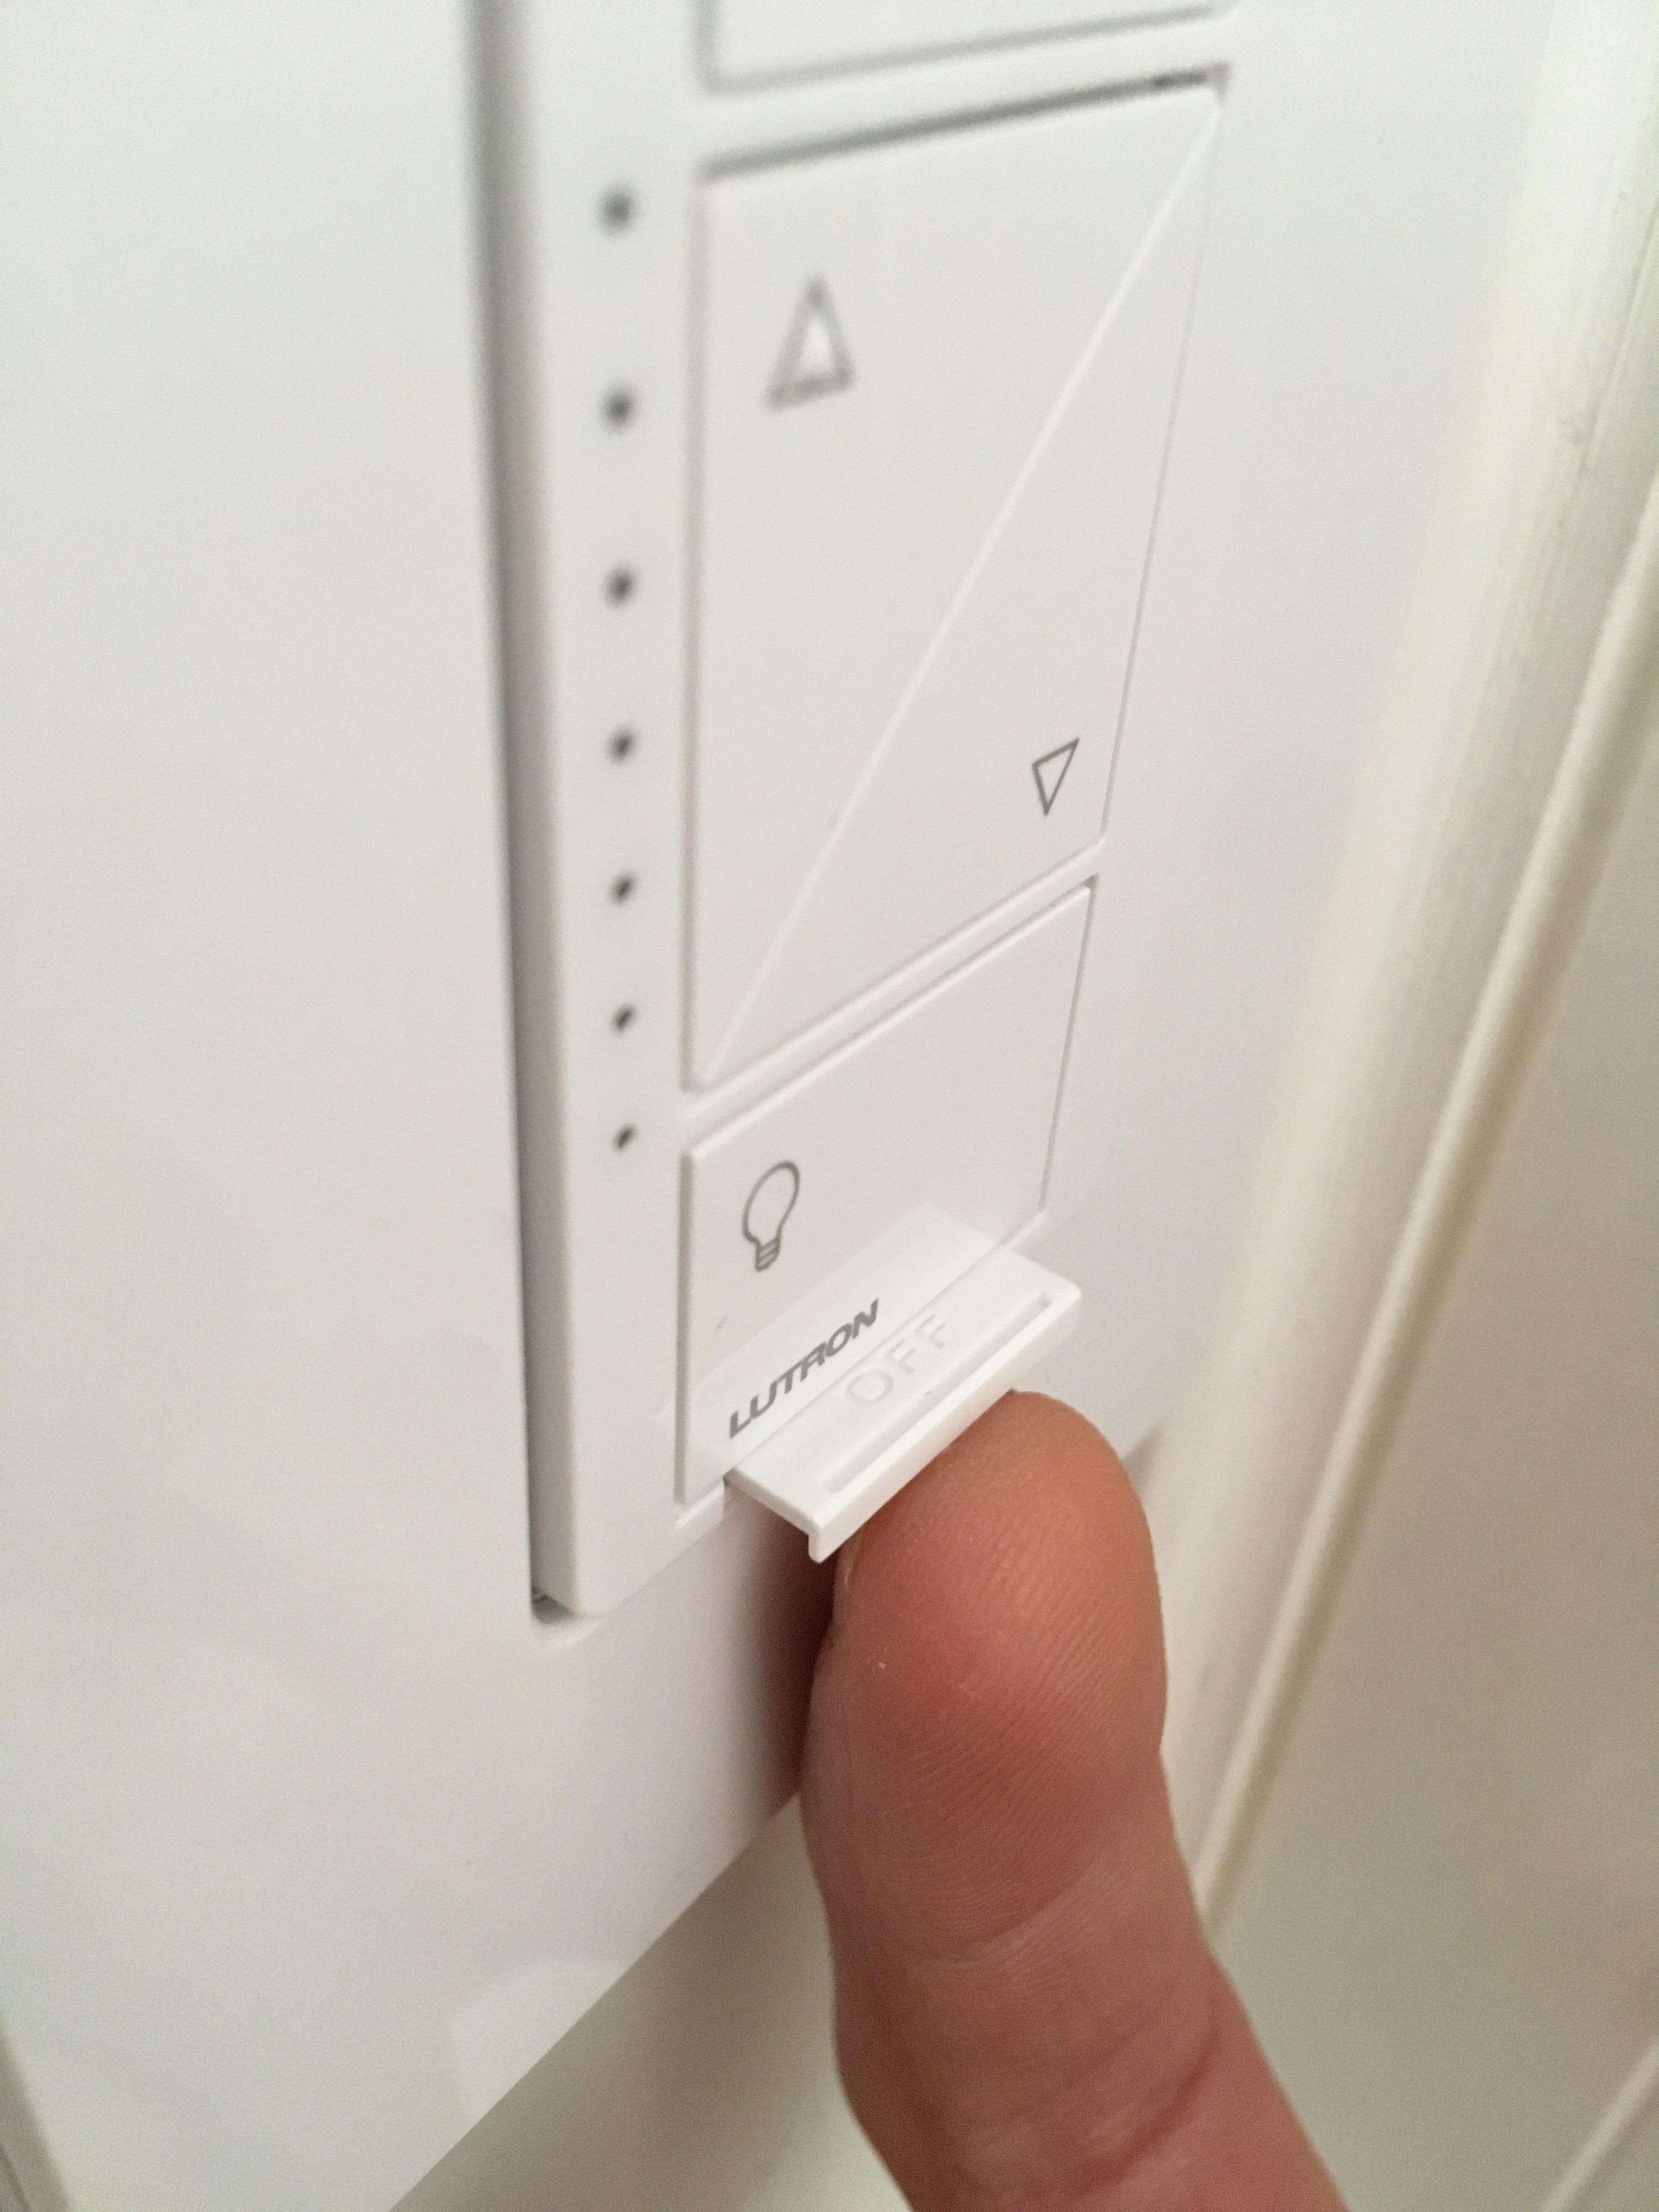 Lutron switches can be completely deactivated with this weird trick